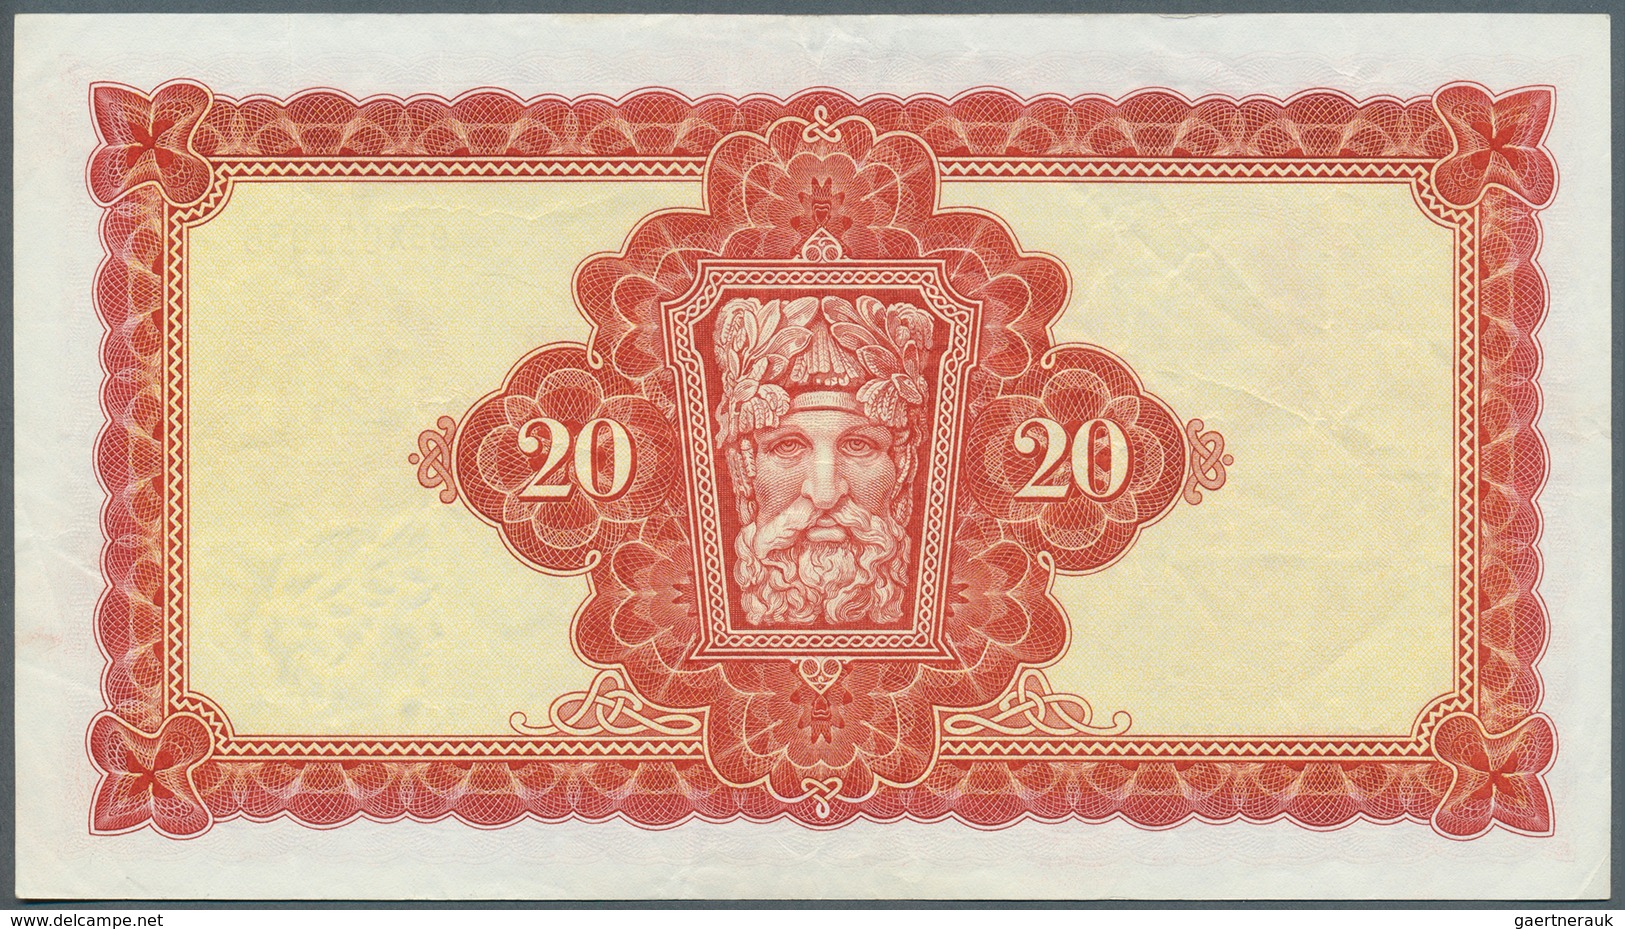 Ireland / Irland: 20 Pounds 1976 P. 67c, Folds And Creases In Paper But No Holes Or Tears, Still Ori - Irland